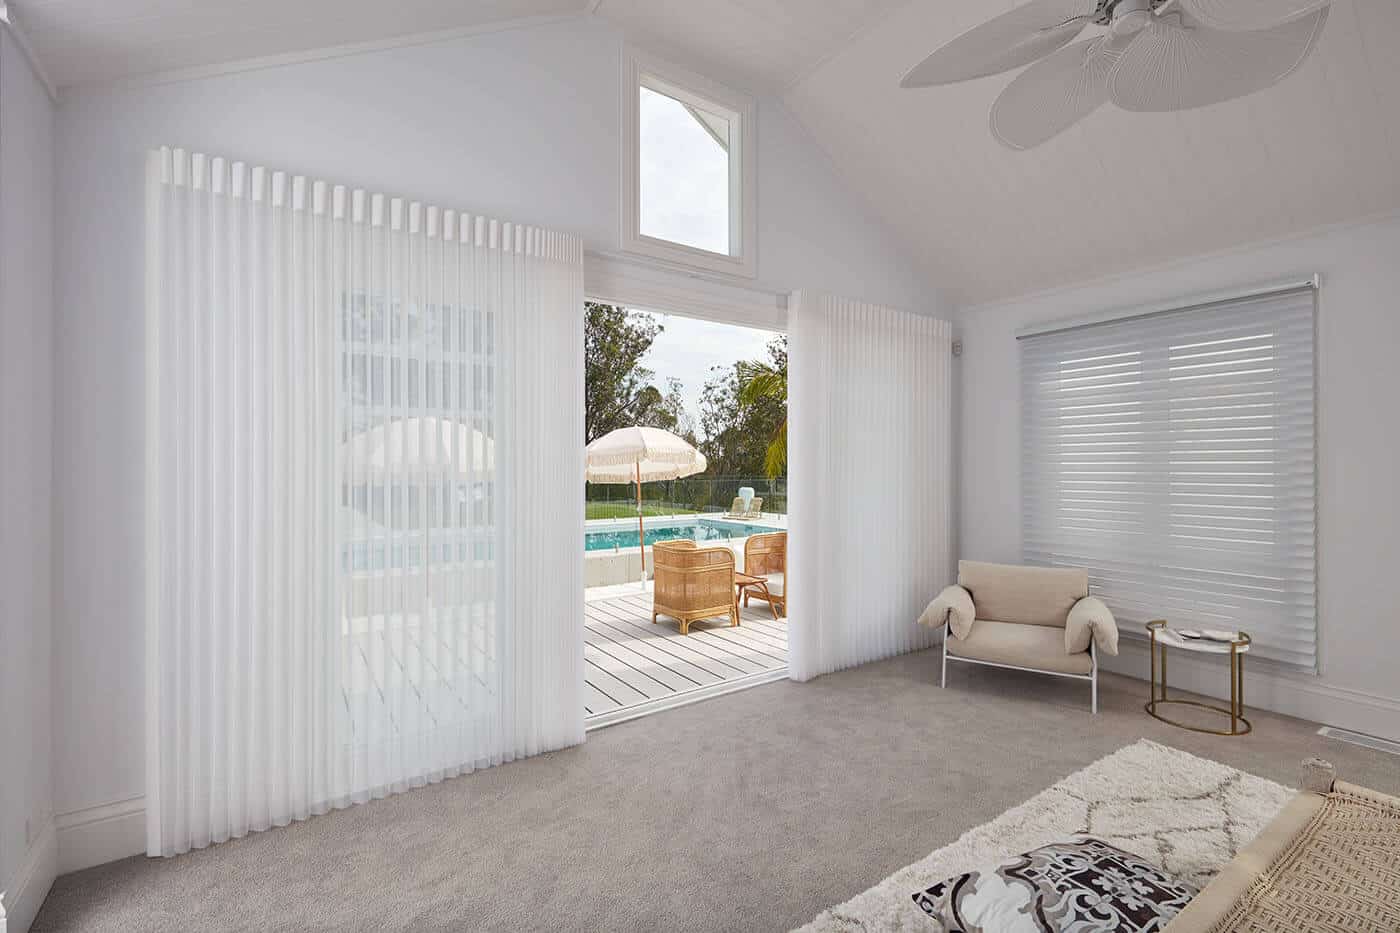 Lightweight Luminette Privacy Sheers by Luxaflex, window furnishing for diffusing natural light indoors. Elegant design in modern living room. On display in Complete Blinds showroom.